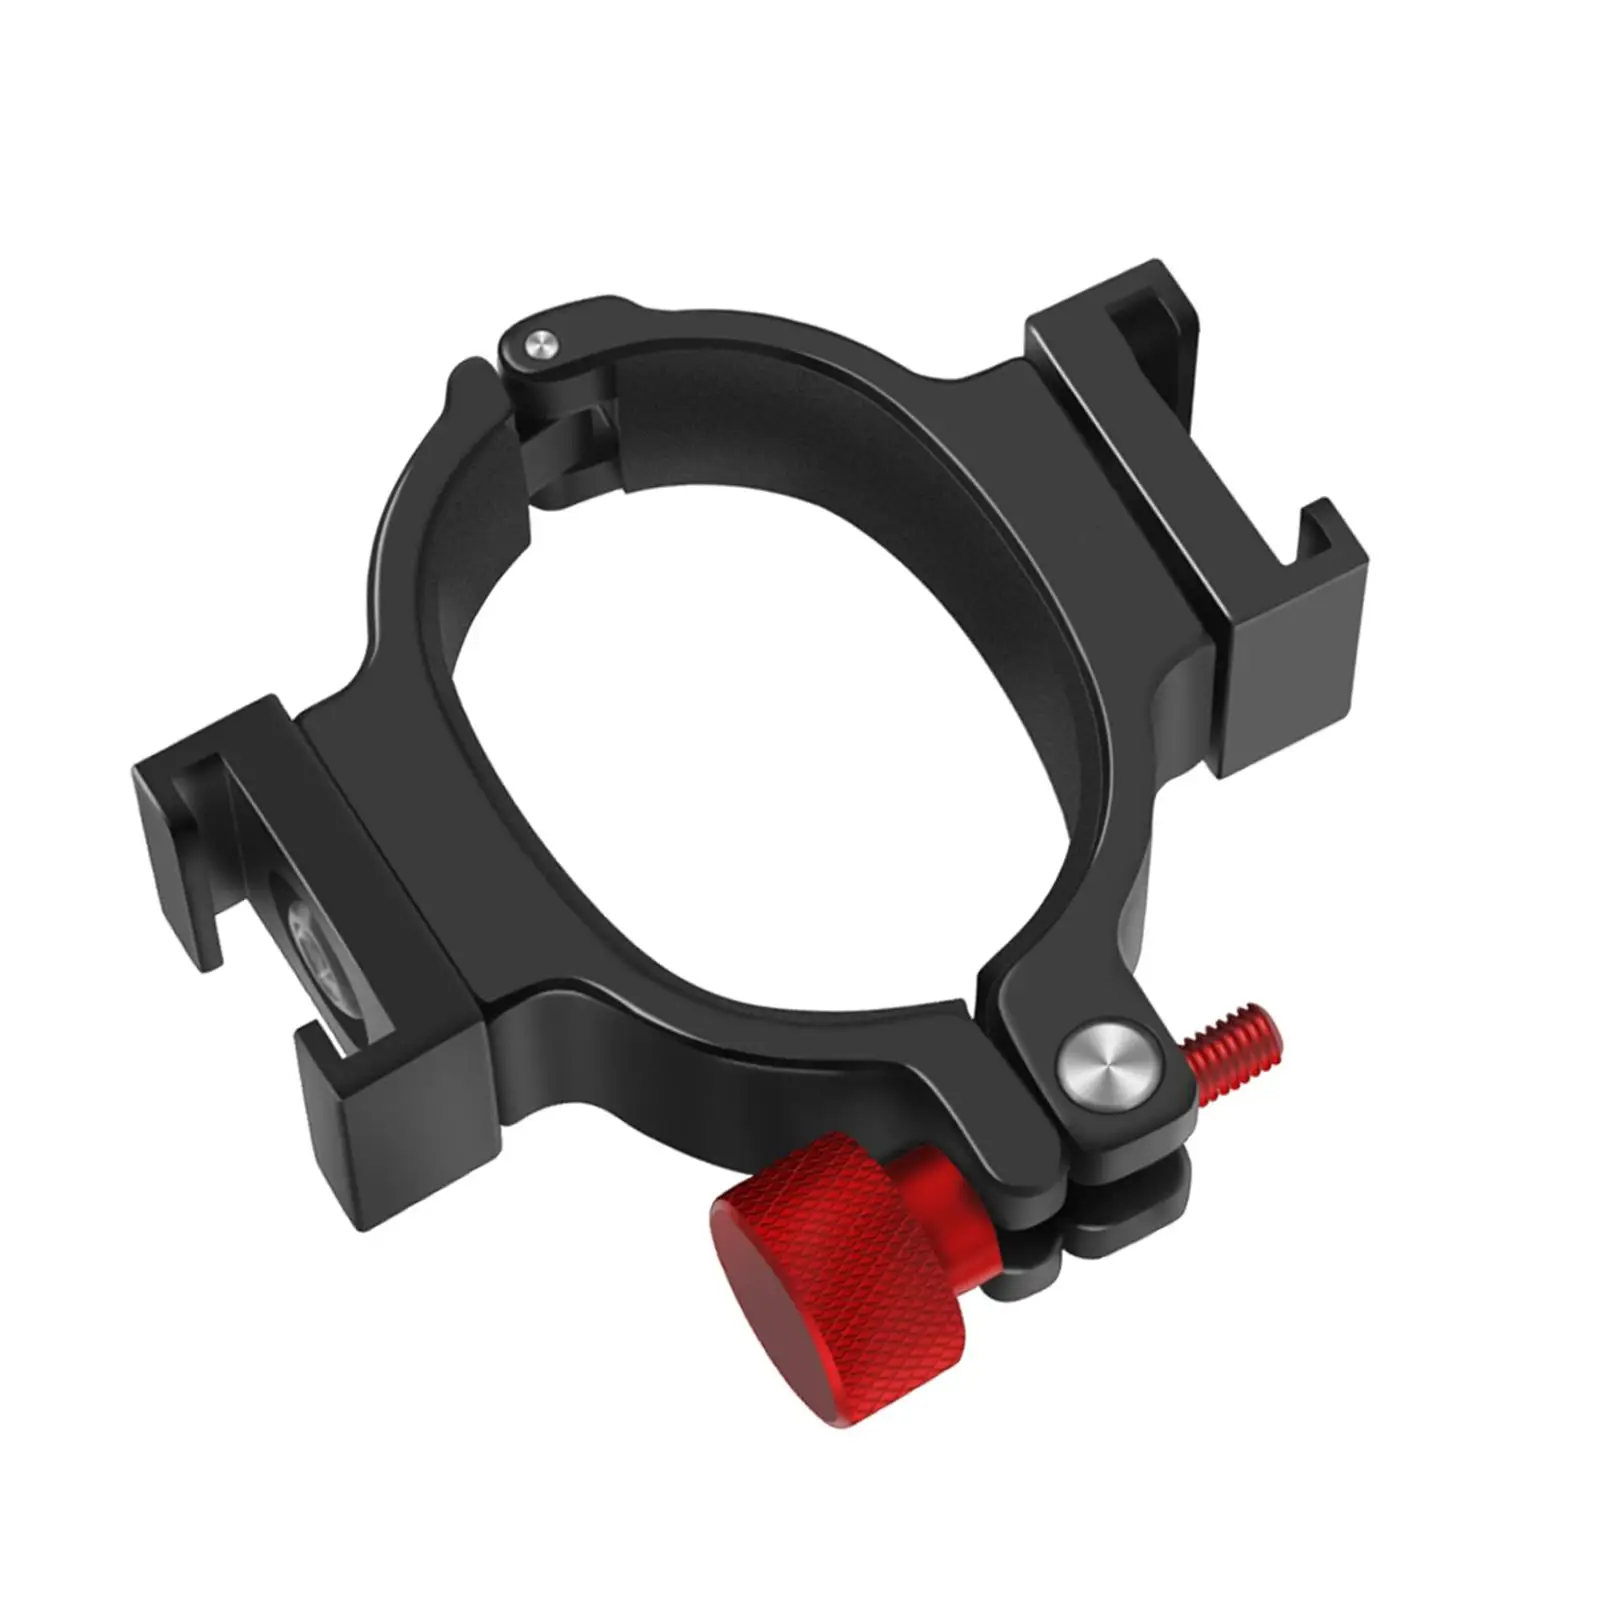 The Shoe Mount Adjustable 360 Degrees Rotation Multi Gimbal Accessory Anti Slip Holder Adapter Extension Adaptor Rack for Audio